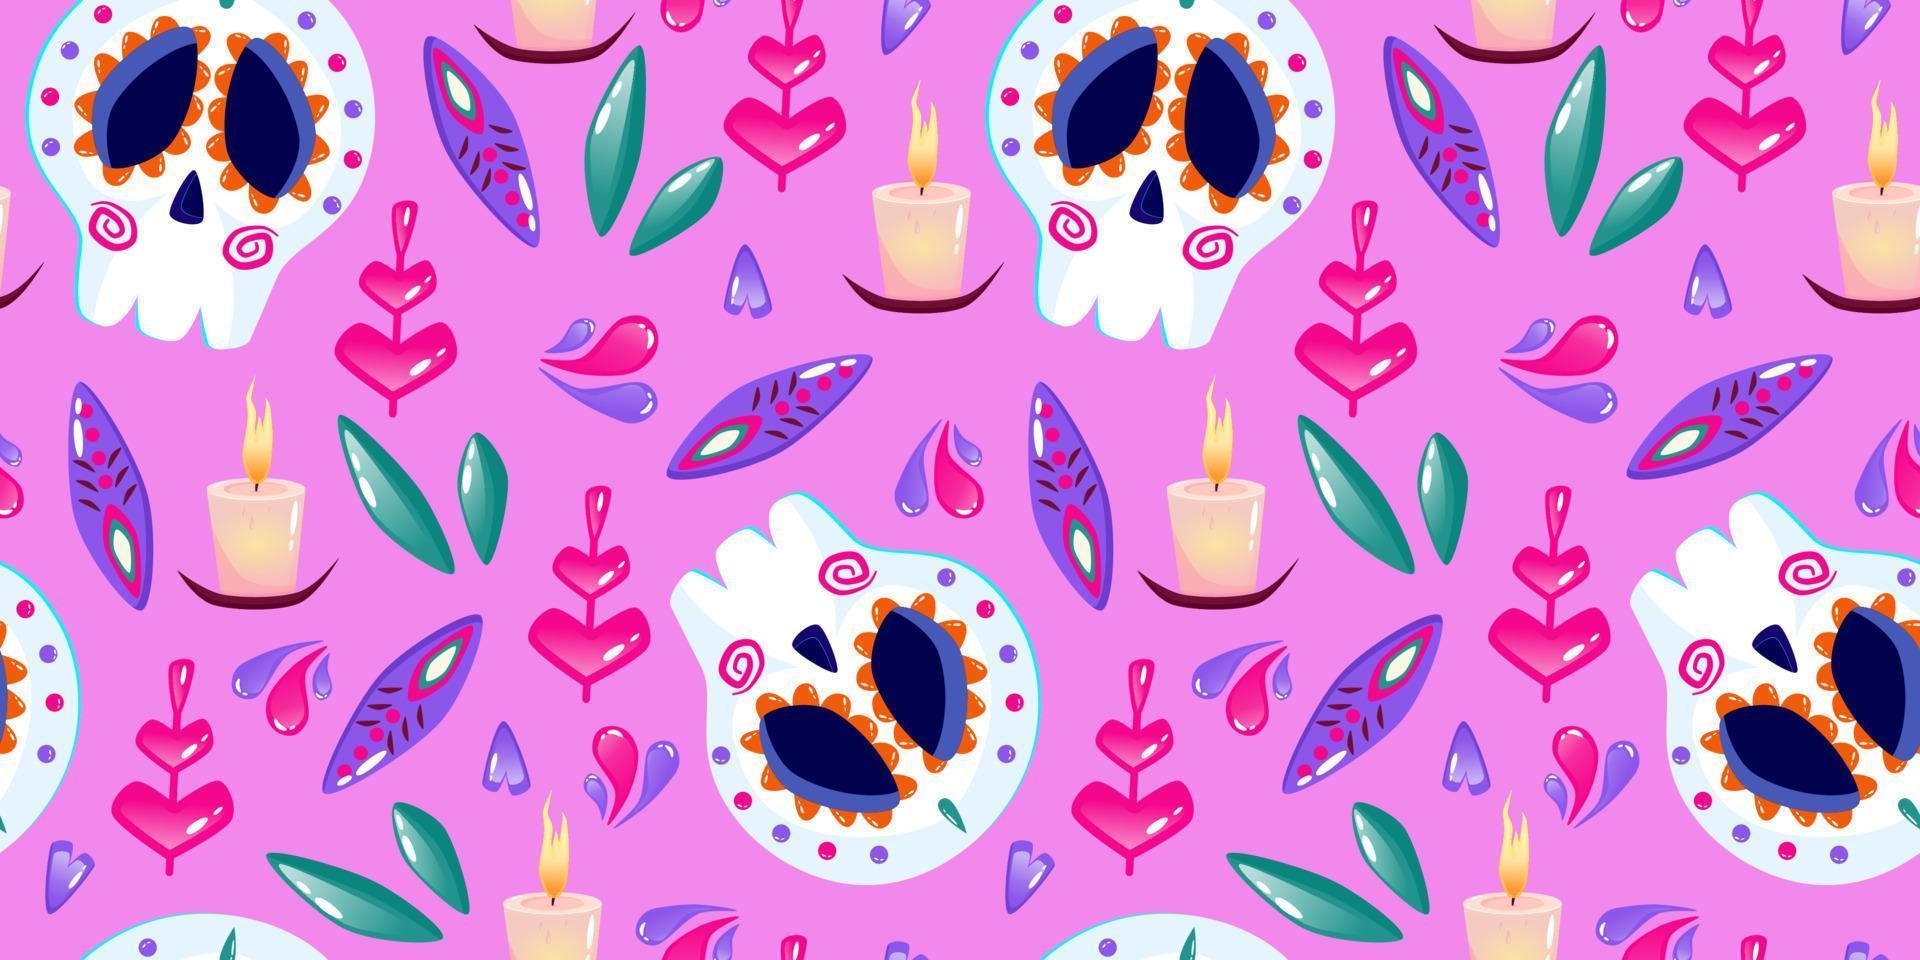 Muertos pattern with skull, candle and heart. Mexico day dead holiday. Floral skull face. Floral seamless background. Halloween seamless pattern. Pink background. vector